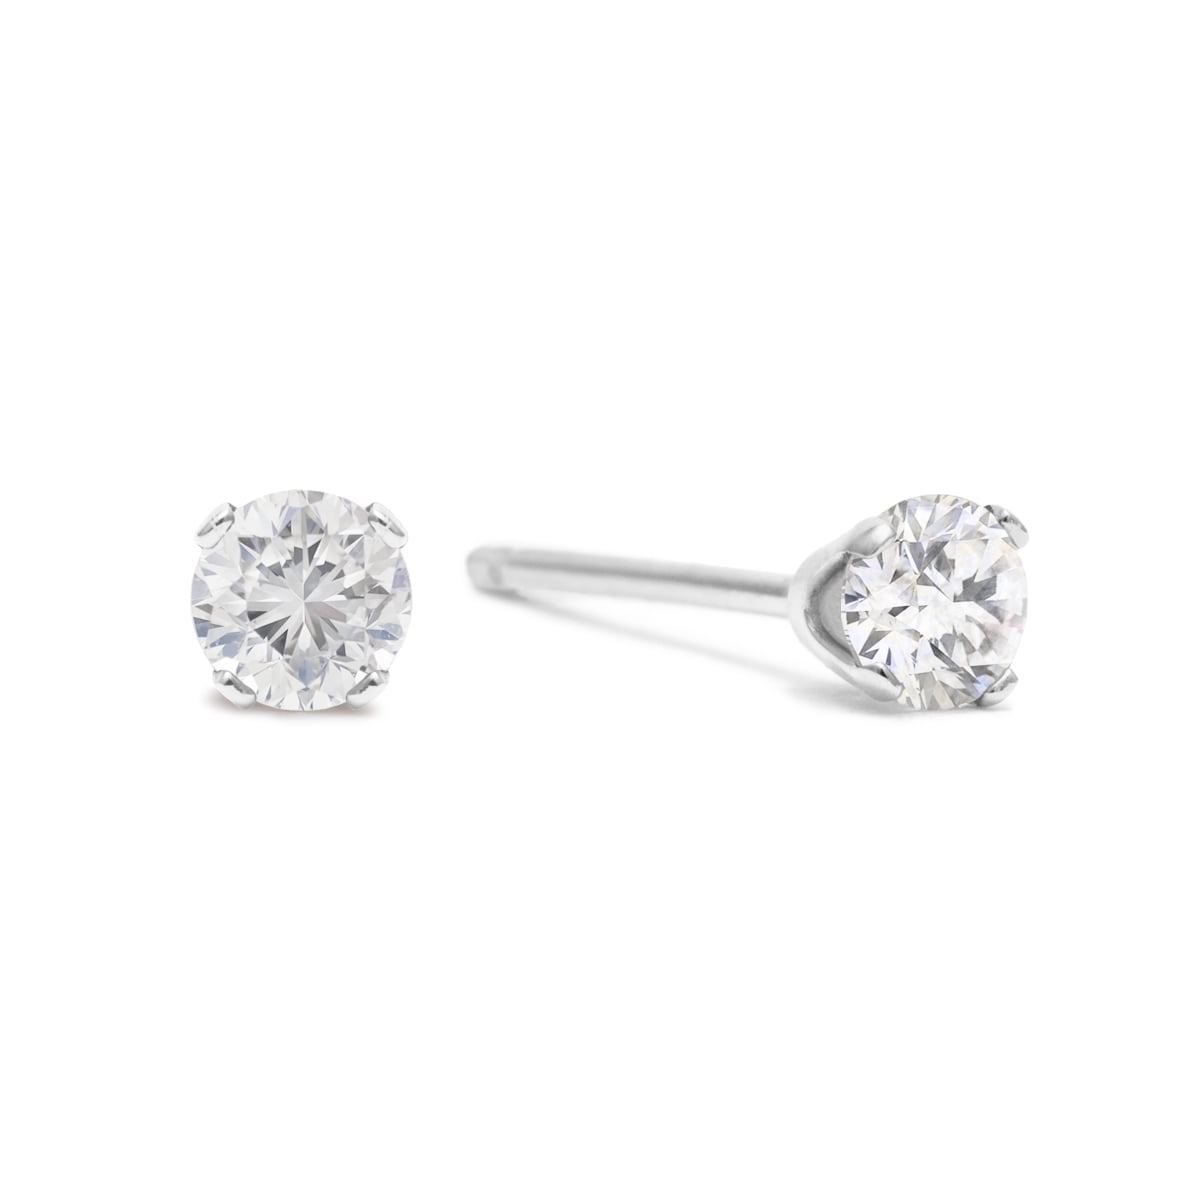 SuperJeweler 5 Point Tiny Diamond Stud Earrings in Solid Silver for Women, Teens and Girls!, Girl's, Size: 0.05 Carats, White